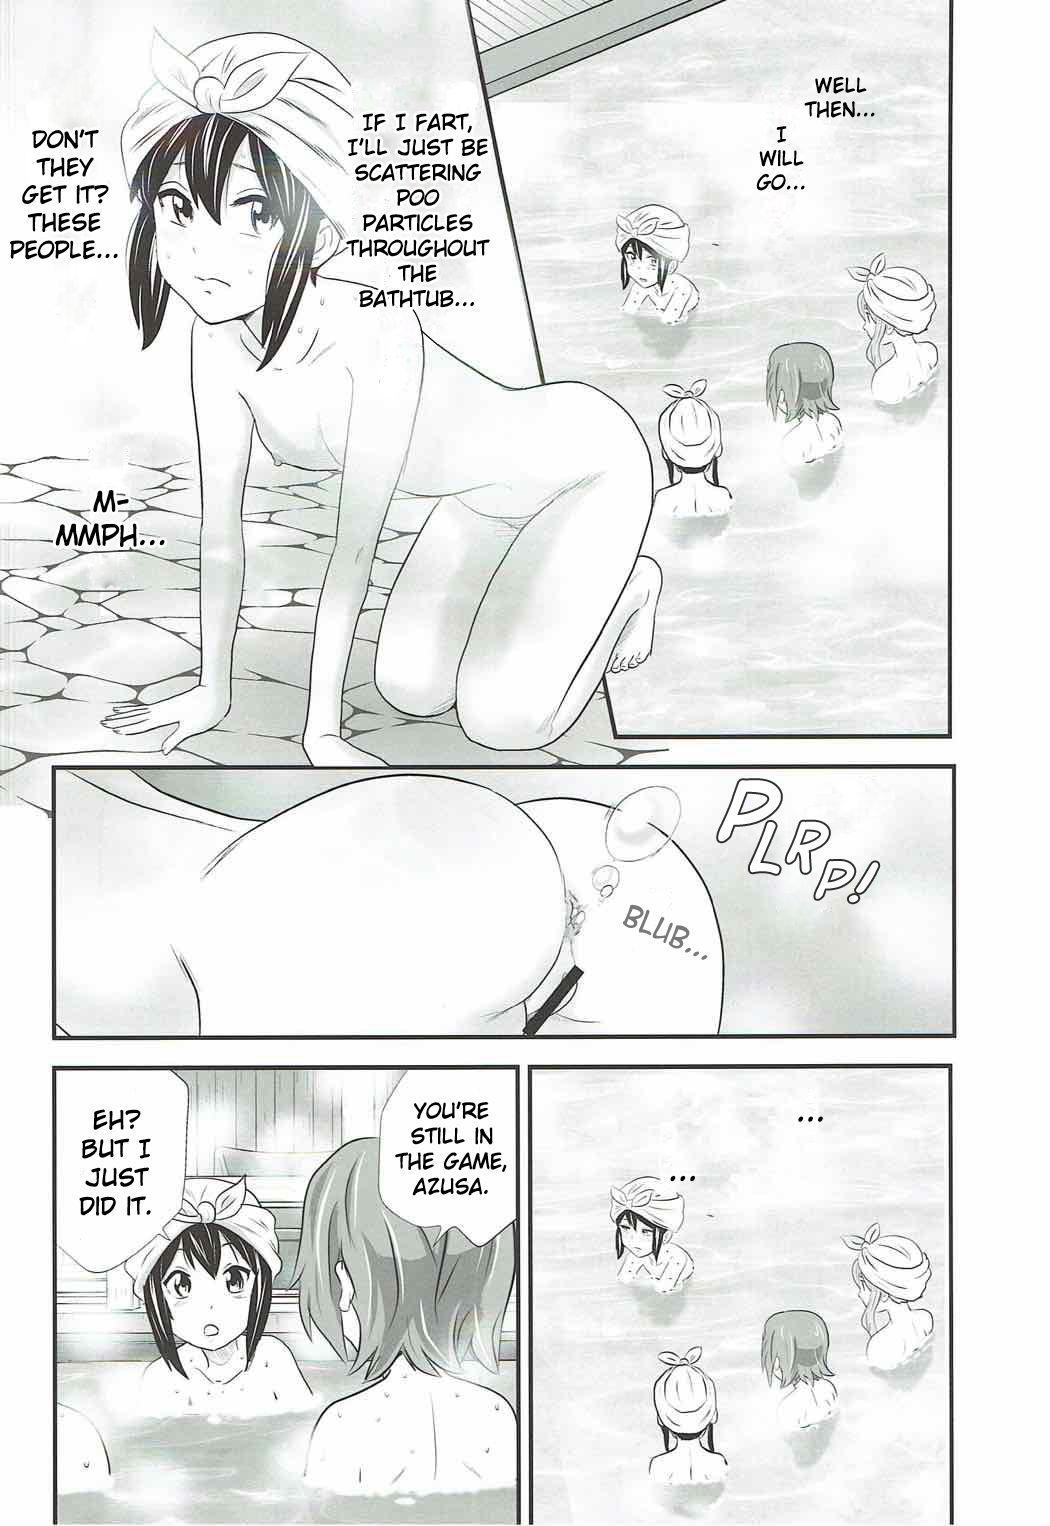 Tugjob Houkago Unchi Time Final | After School Poop Time Final - K on Wife - Page 7